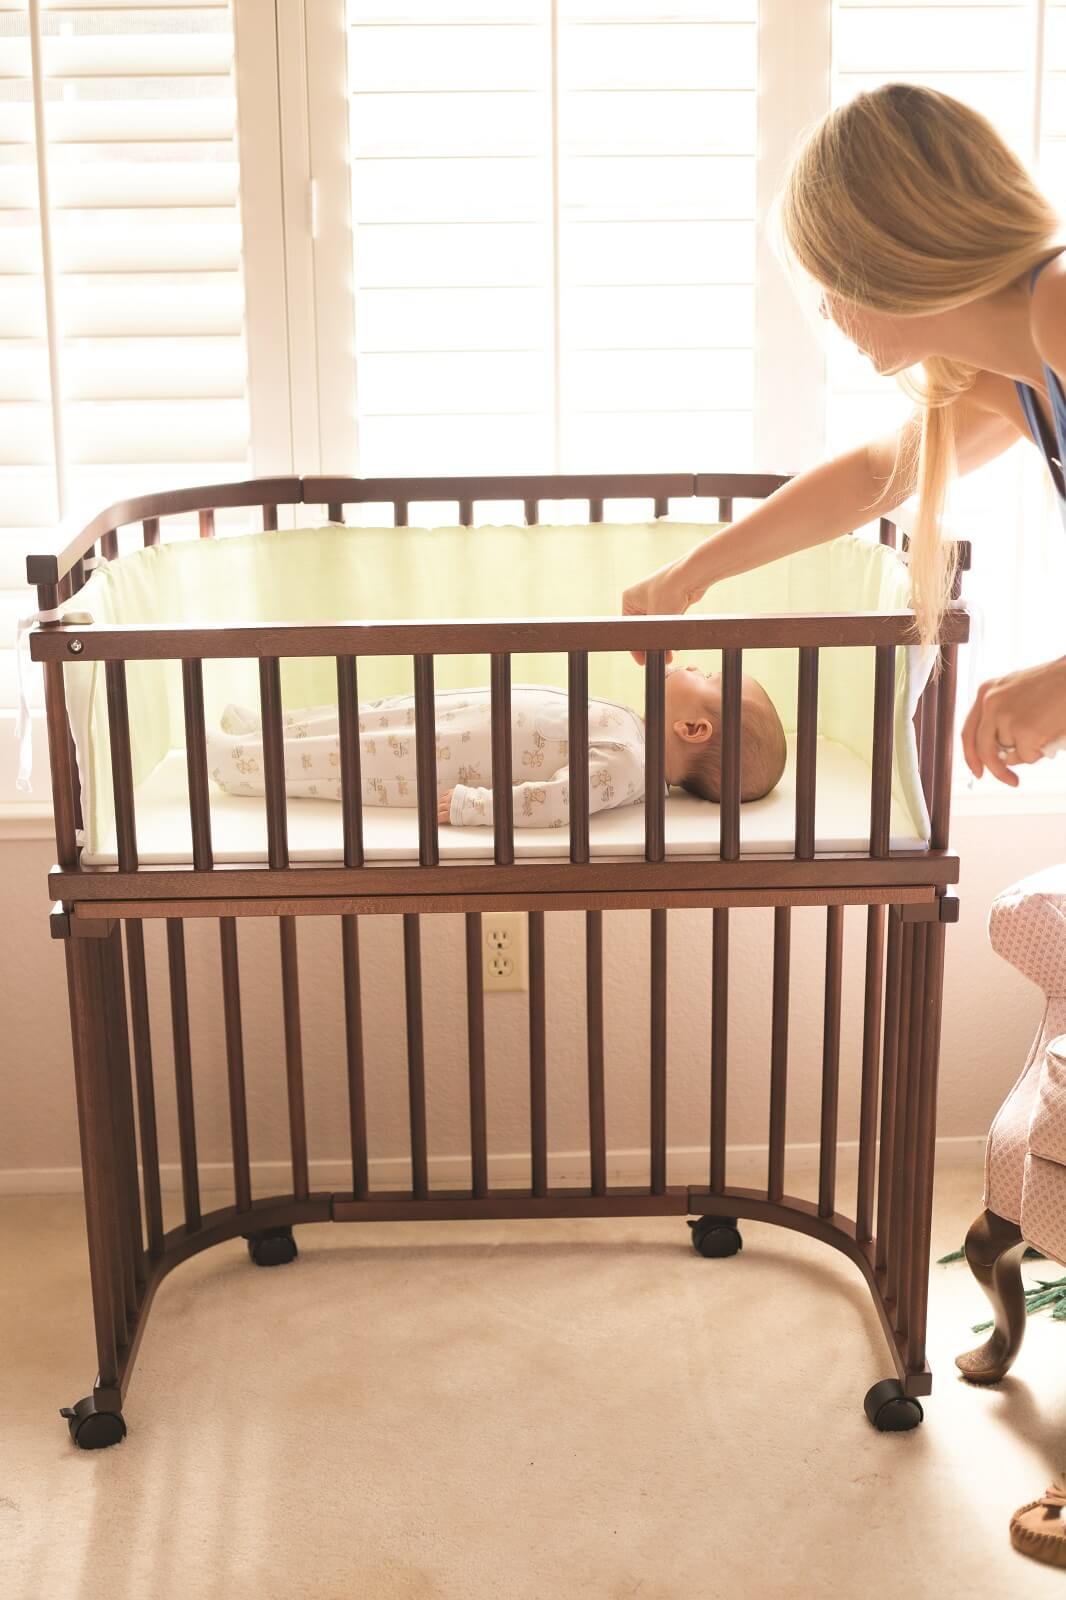 How to Break Co Sleeping and Move Baby Into a Room of Their Own